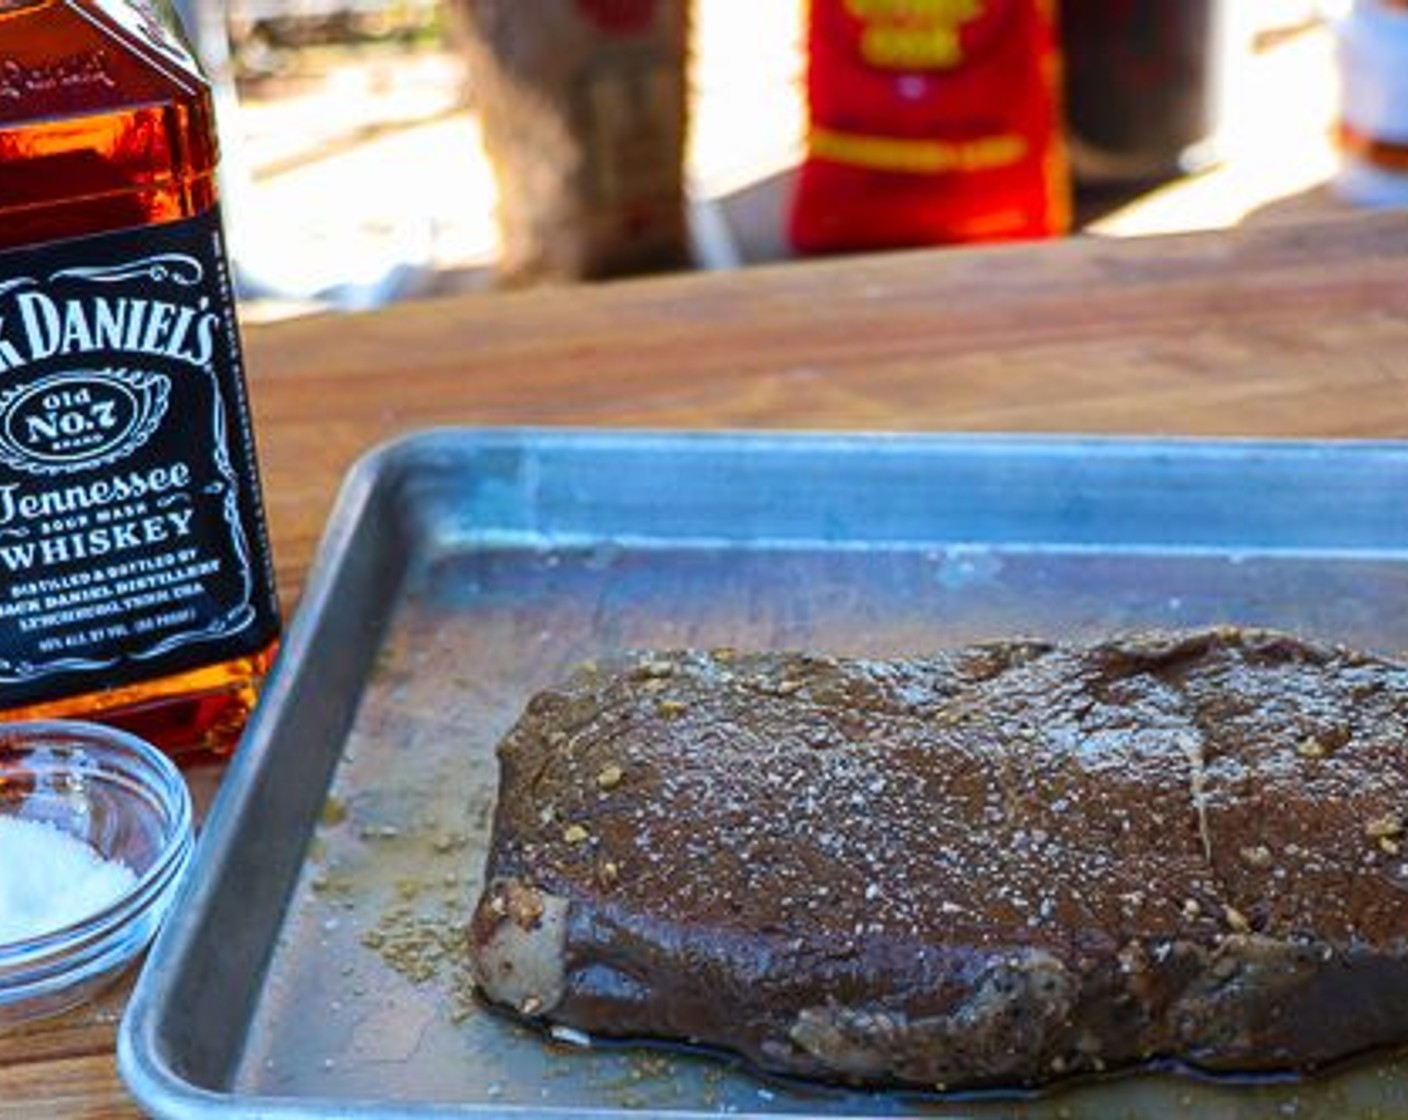 step 4 Remove steak from marinade and drain excess liquid. Season both sides with Kosher Salt (1 Tbsp) and rest at room temp for 20-30 minutes